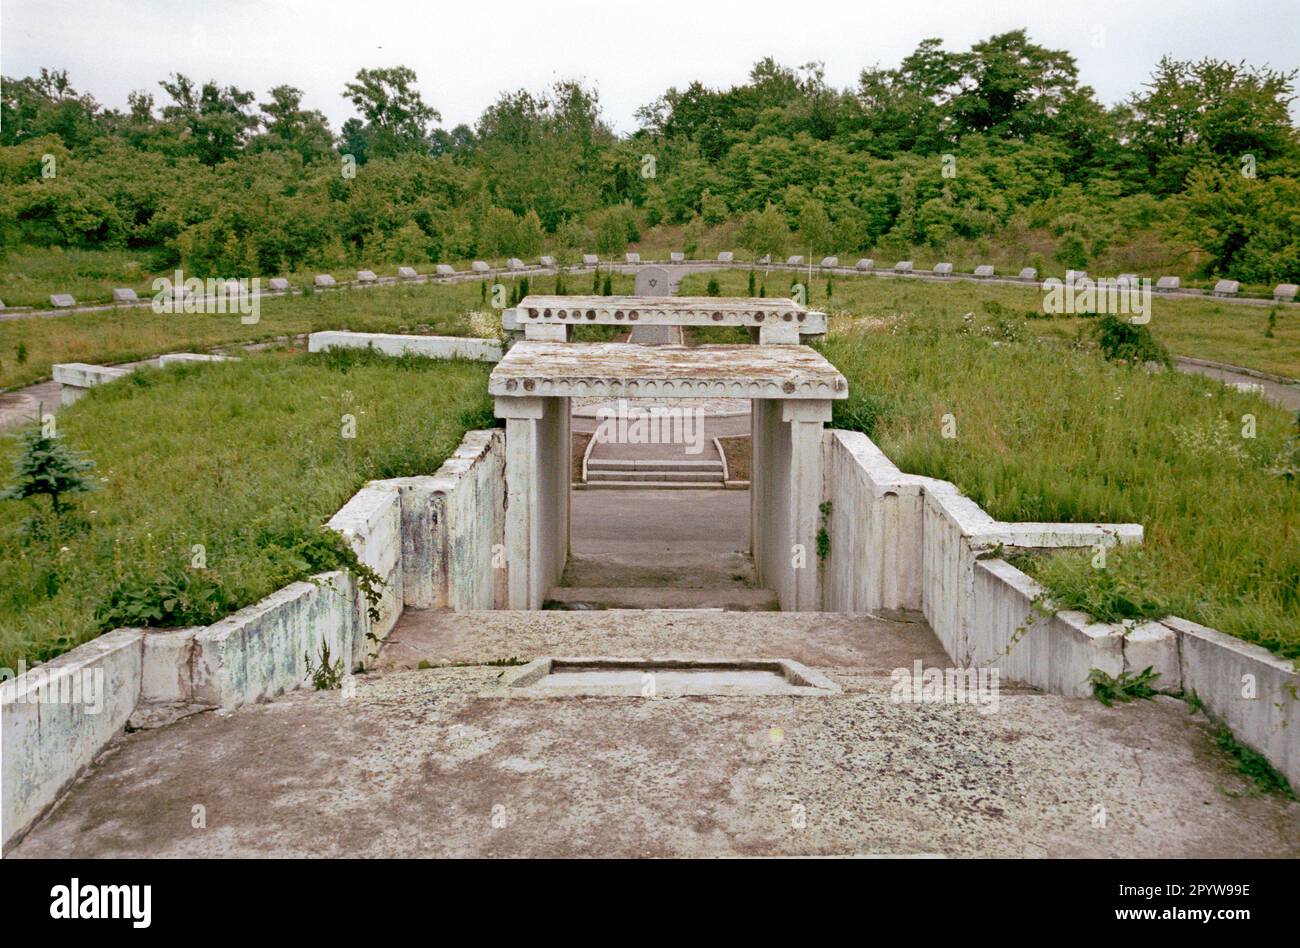 Ukraine / Memorials 1998 Monument to 17000 Jews shot in Rovno, western Ukraine. They were killed by Einsatzgruppen at the very beginning of the Russian war. In Rovno Gauleiter Koch had his quarters. In this trench was executed. // History / 1933 - 1945 / Holocaust / private / Glaser / Volhynia [automated translation] Stock Photo